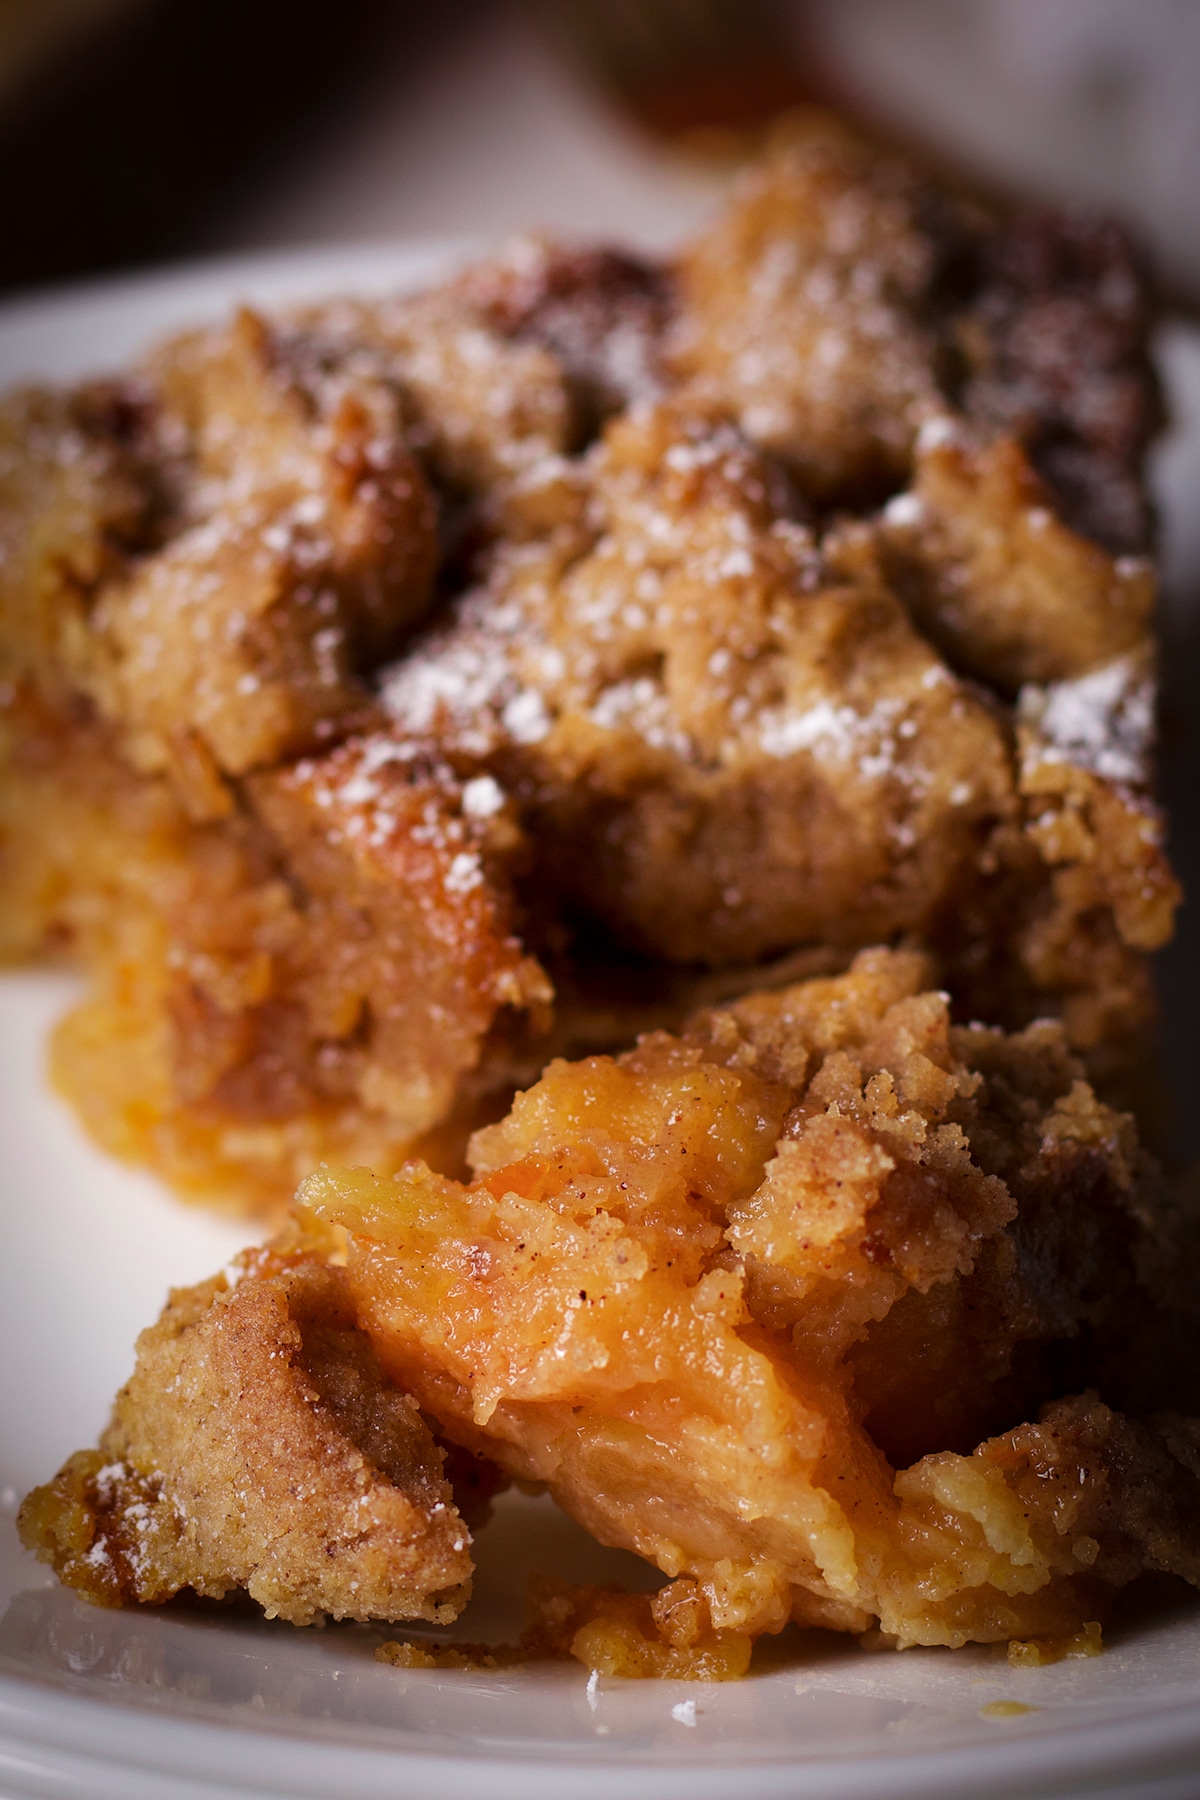 Using a fork to cut a bite of apple crumb cake from a slice.